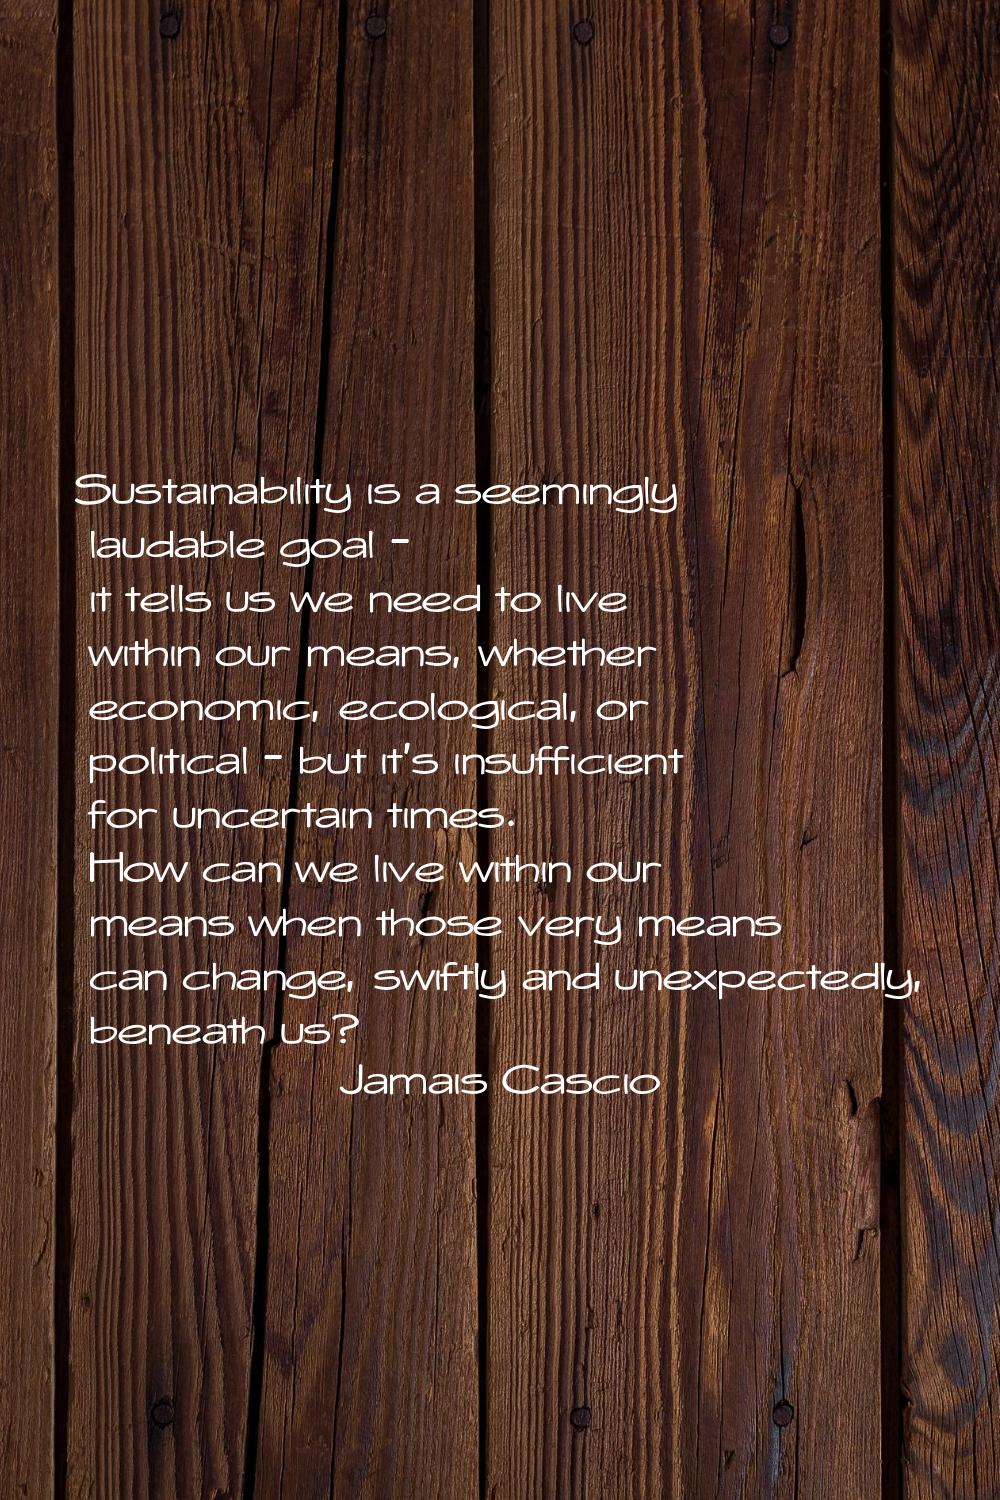 Sustainability is a seemingly laudable goal - it tells us we need to live within our means, whether